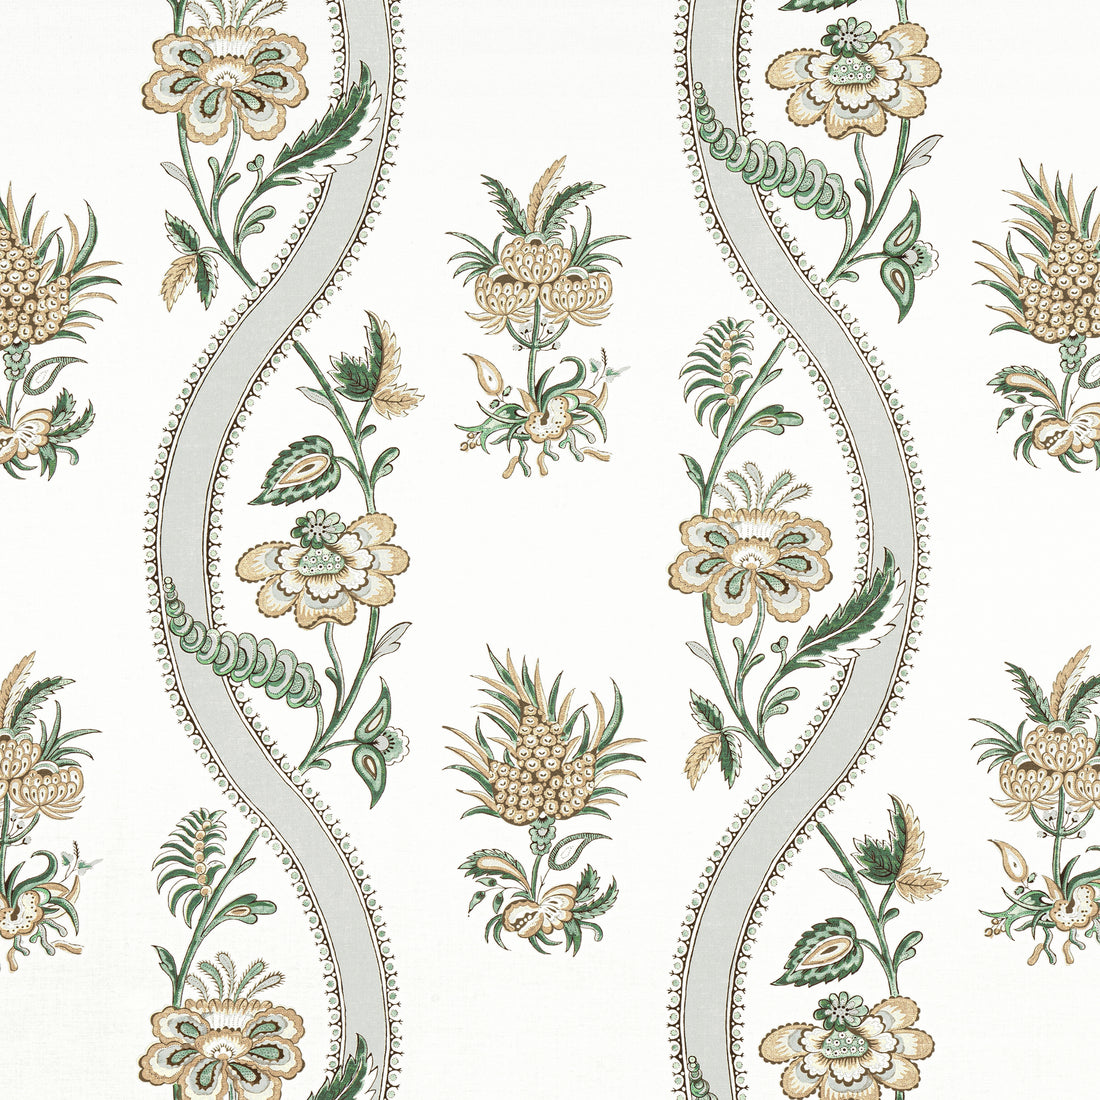 Ribbon Floral fabric in green color - pattern number F936421 - by Thibaut in the Indienne collection